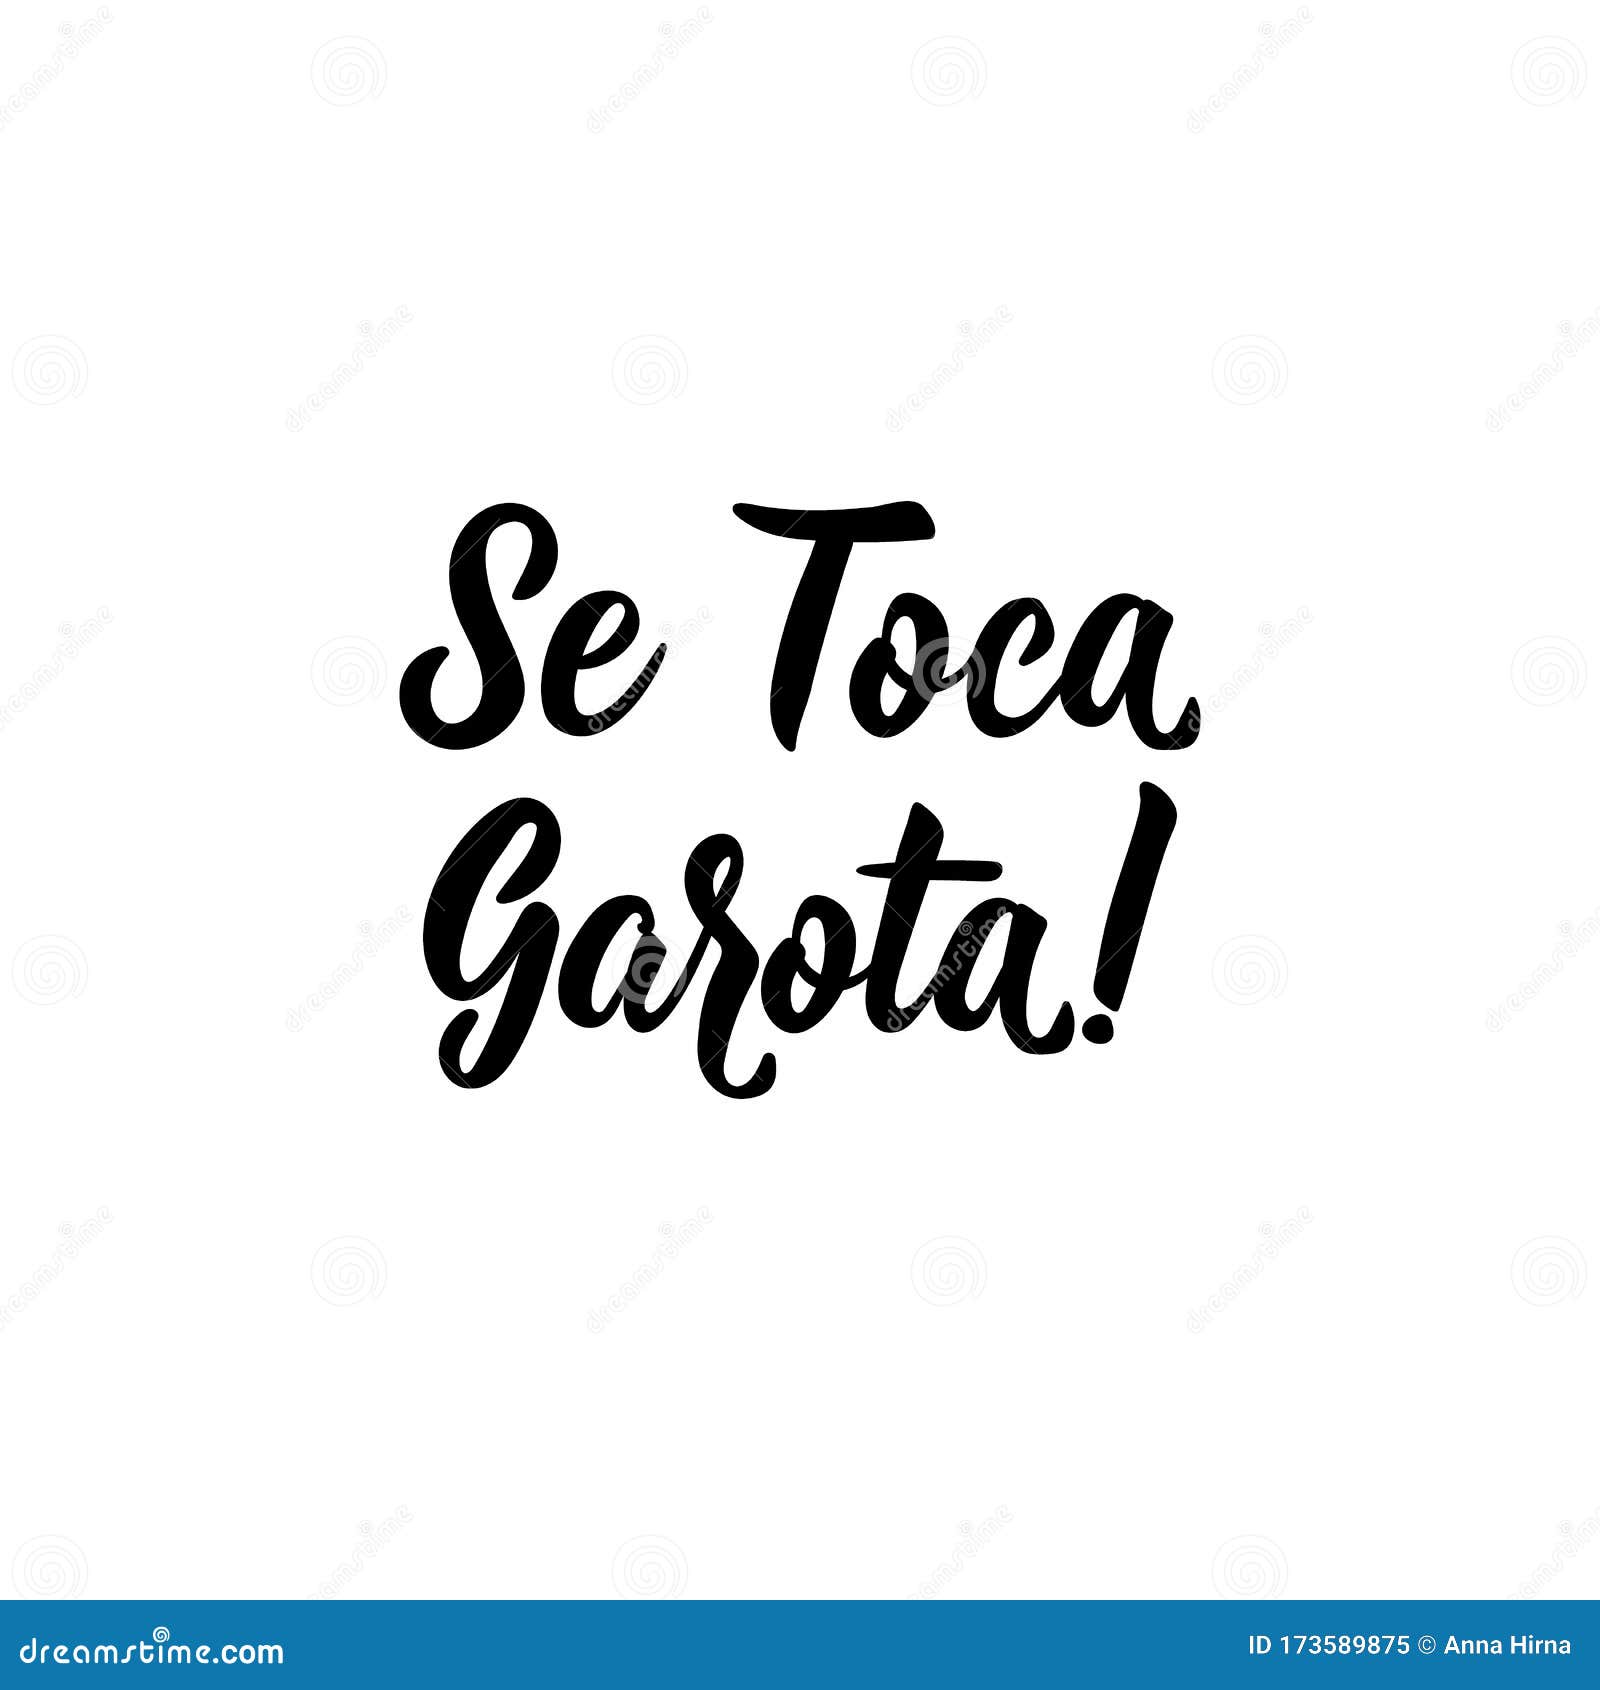 touch yourself girl in portuguese. ink  with hand-drawn lettering. se toca garota